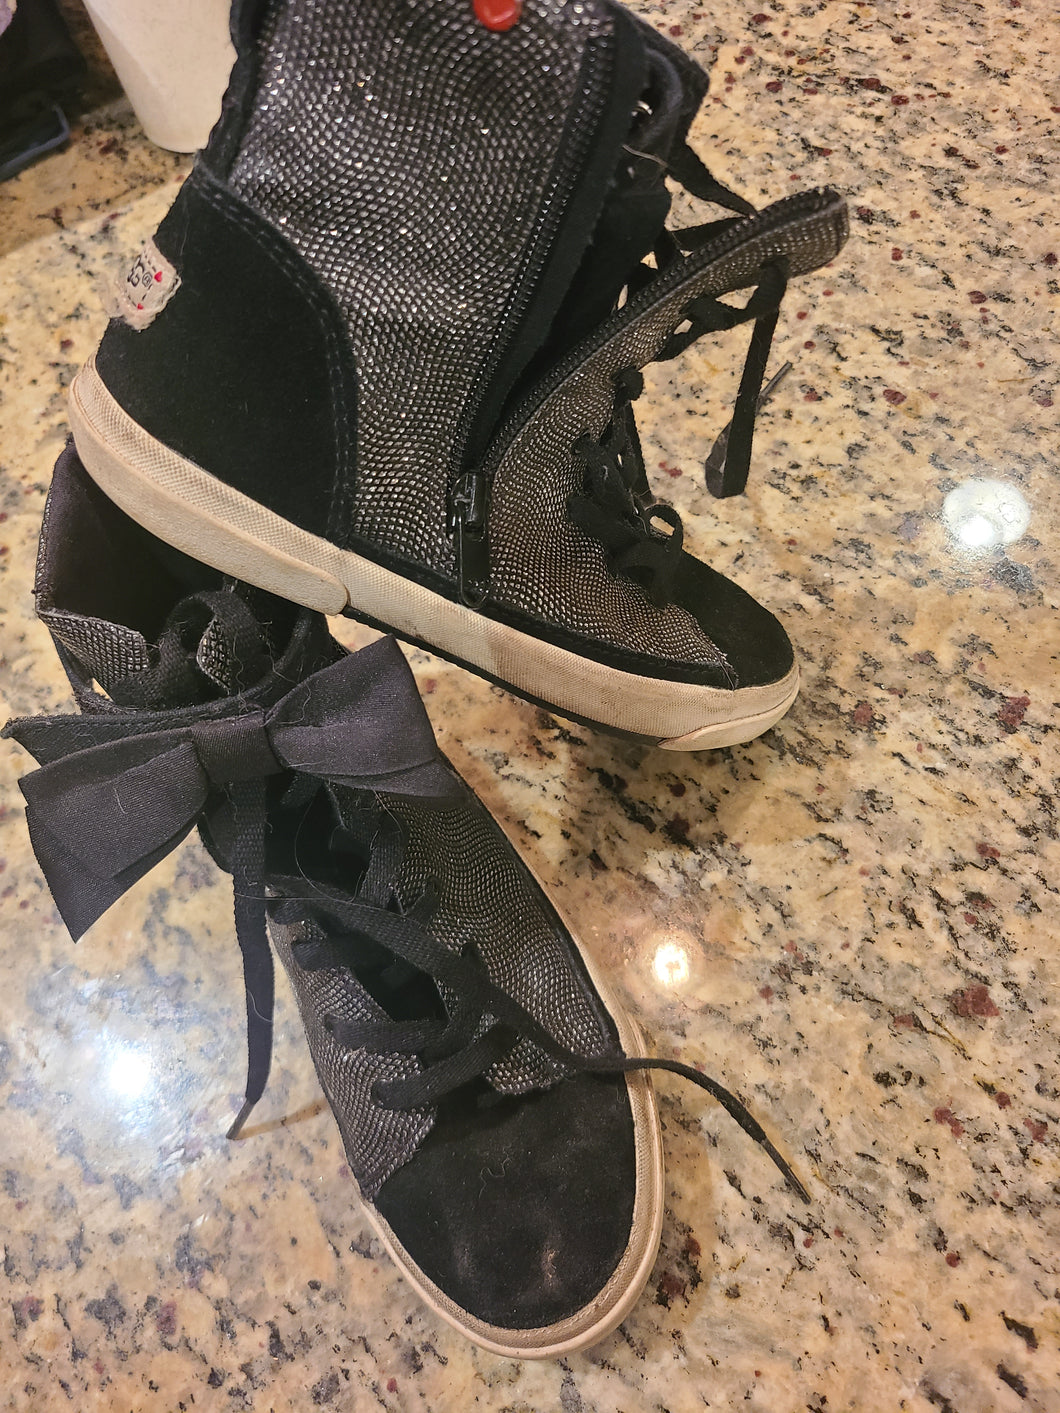 Ugg high top gym shoes black with silver sparkle 2